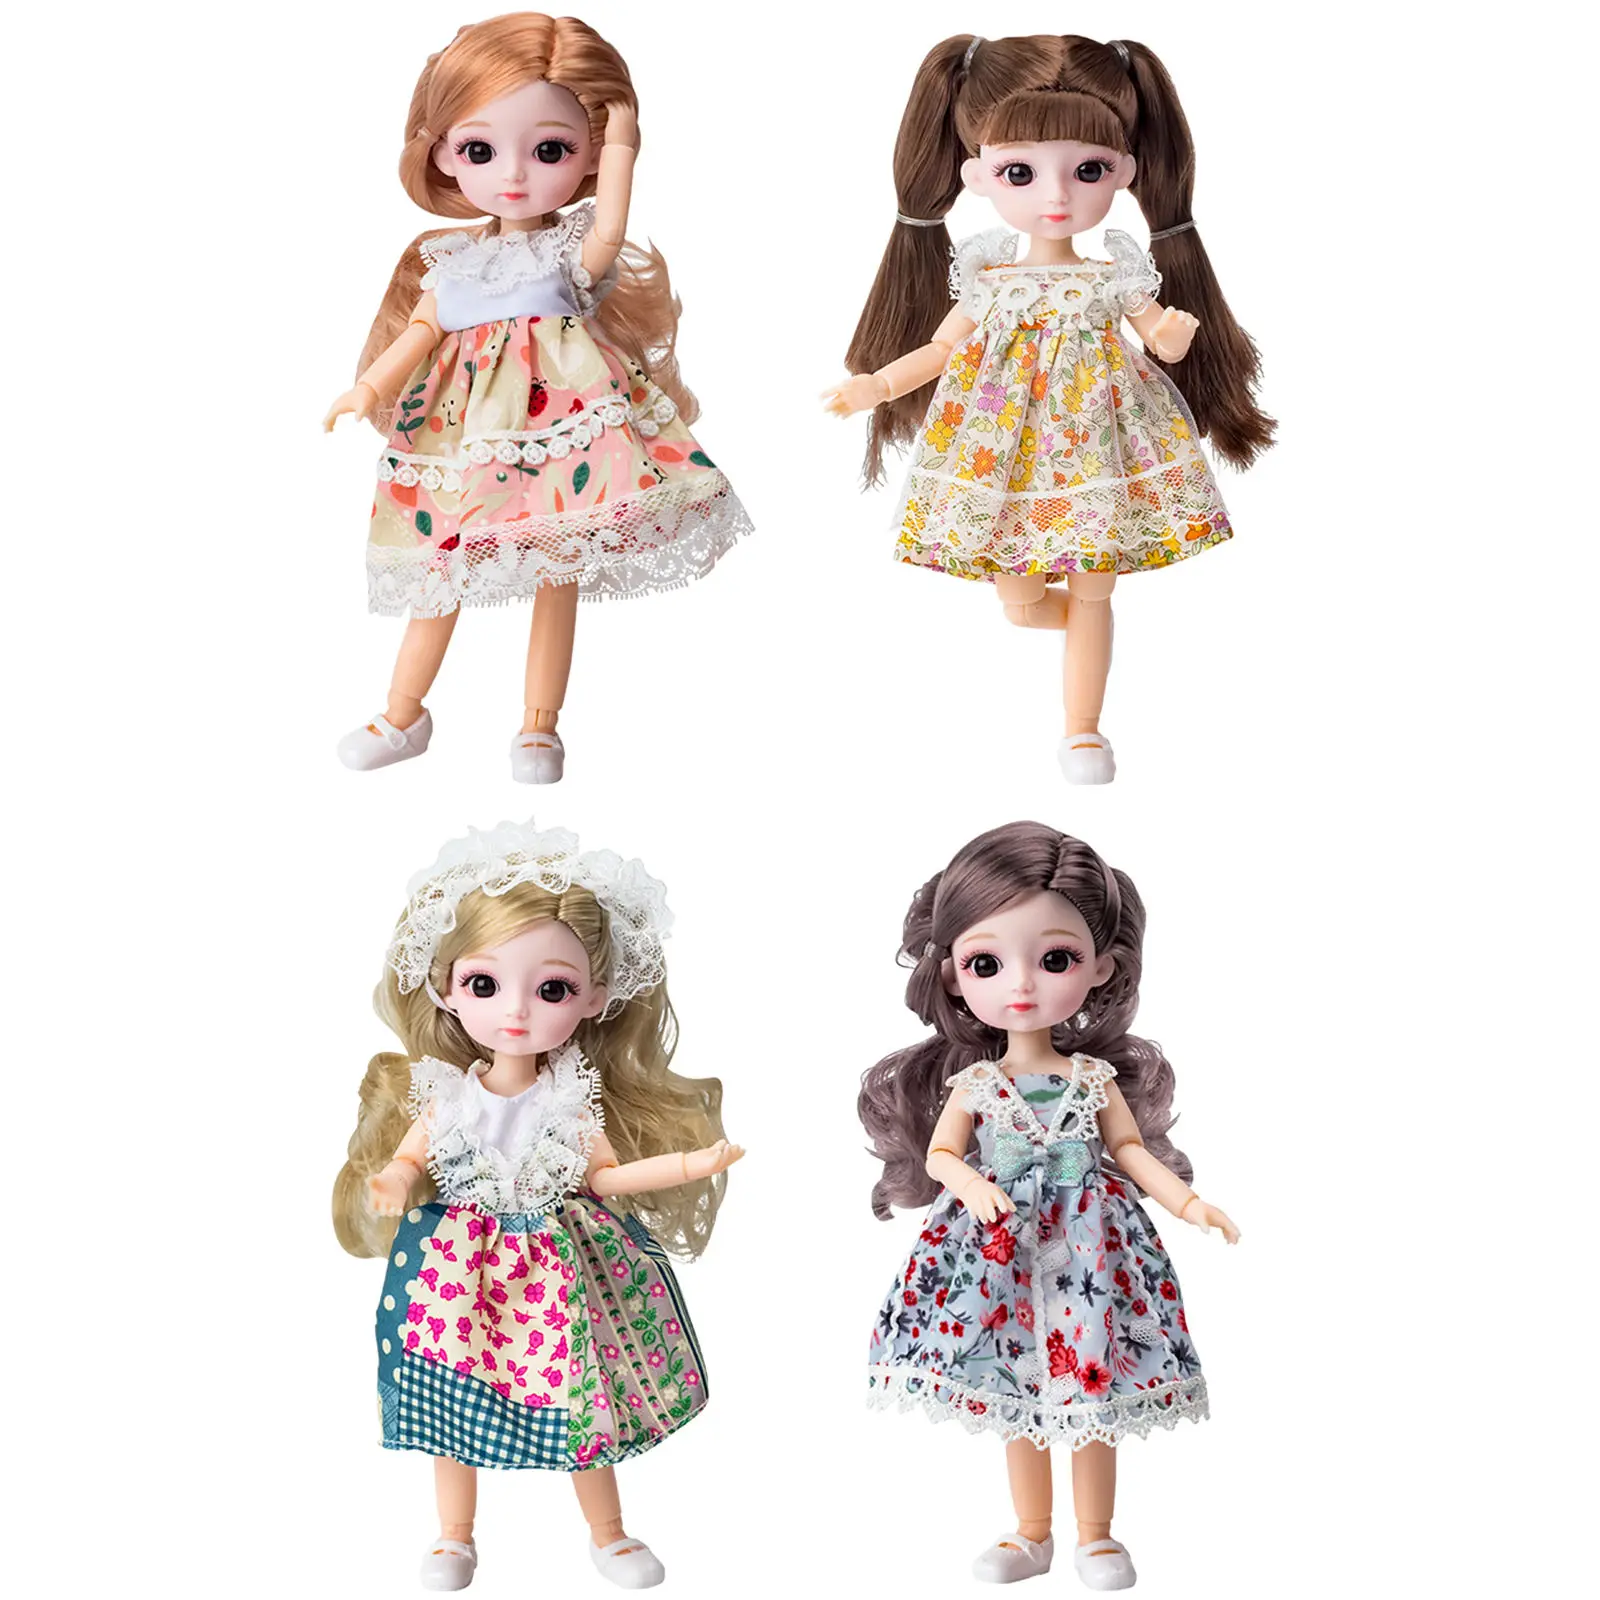 13 Set Moveable Joint Princess Standing Doll, Princess Doll Blue Sleeping Blonde Rapunzel Fashion Doll for Girl House